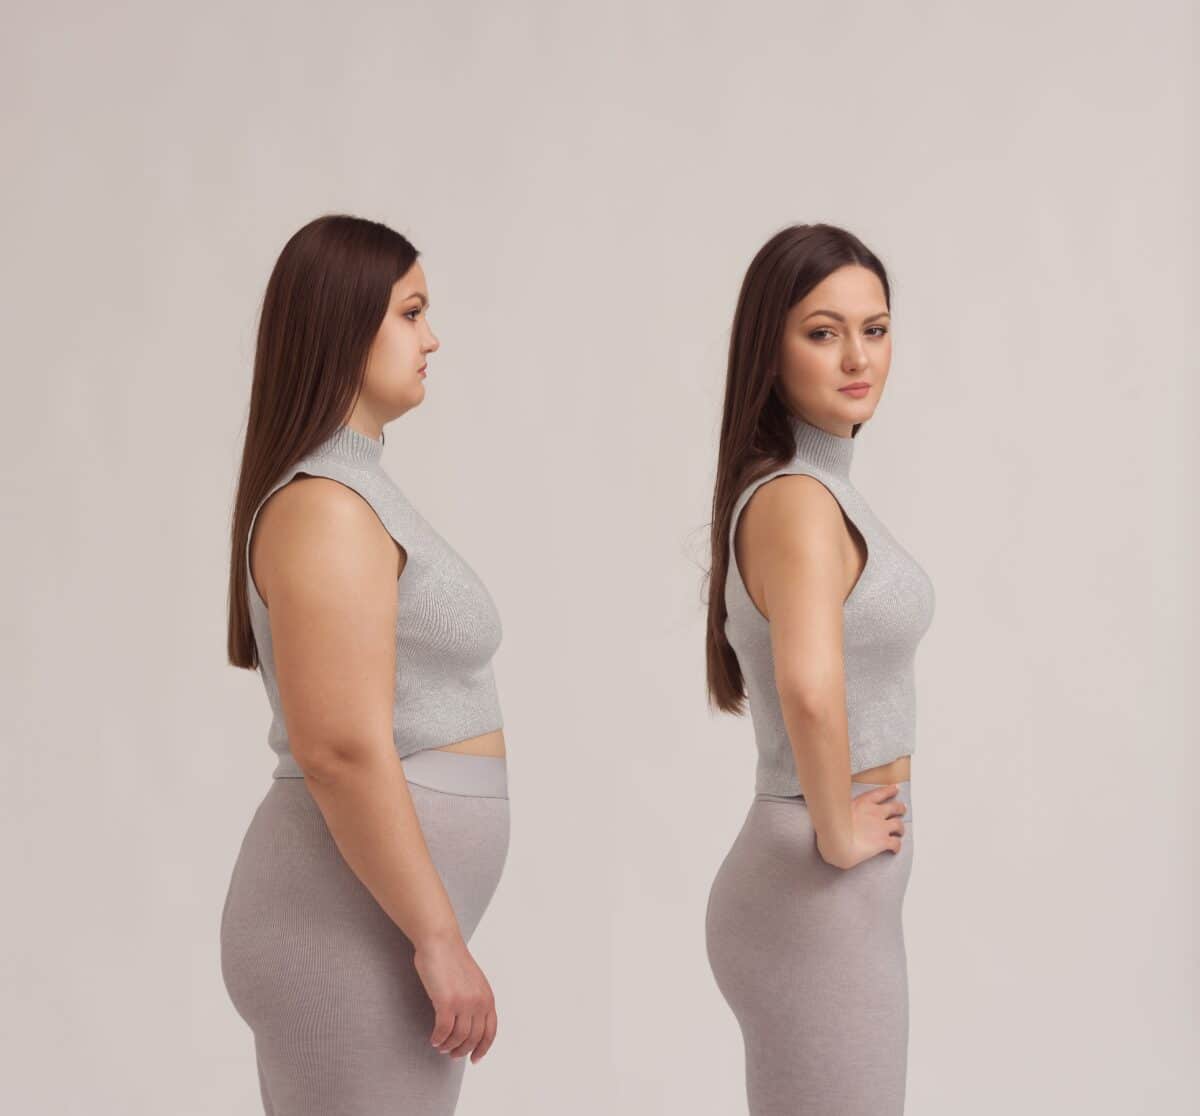 Woman Showing Weight Loss Achieved with Semaglutide